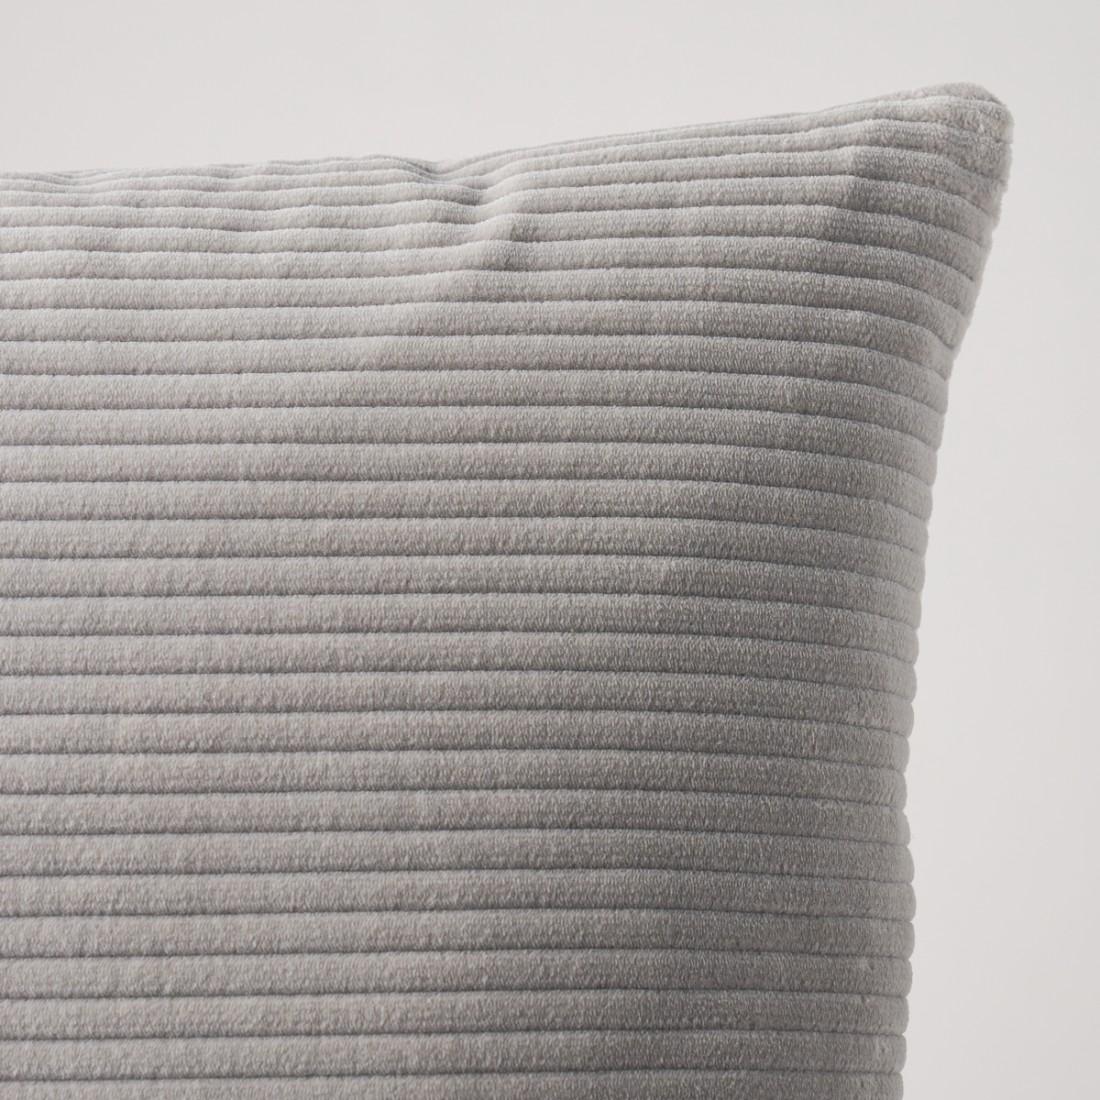 This pillow features Wyatt Corduroy with a knife edge finish. With super soft quarter-inch wales, great texture and a performance finish, Wyatt in winter white is our most versatile corduroy fabric. Easy to use, the cotton classic comes in a range